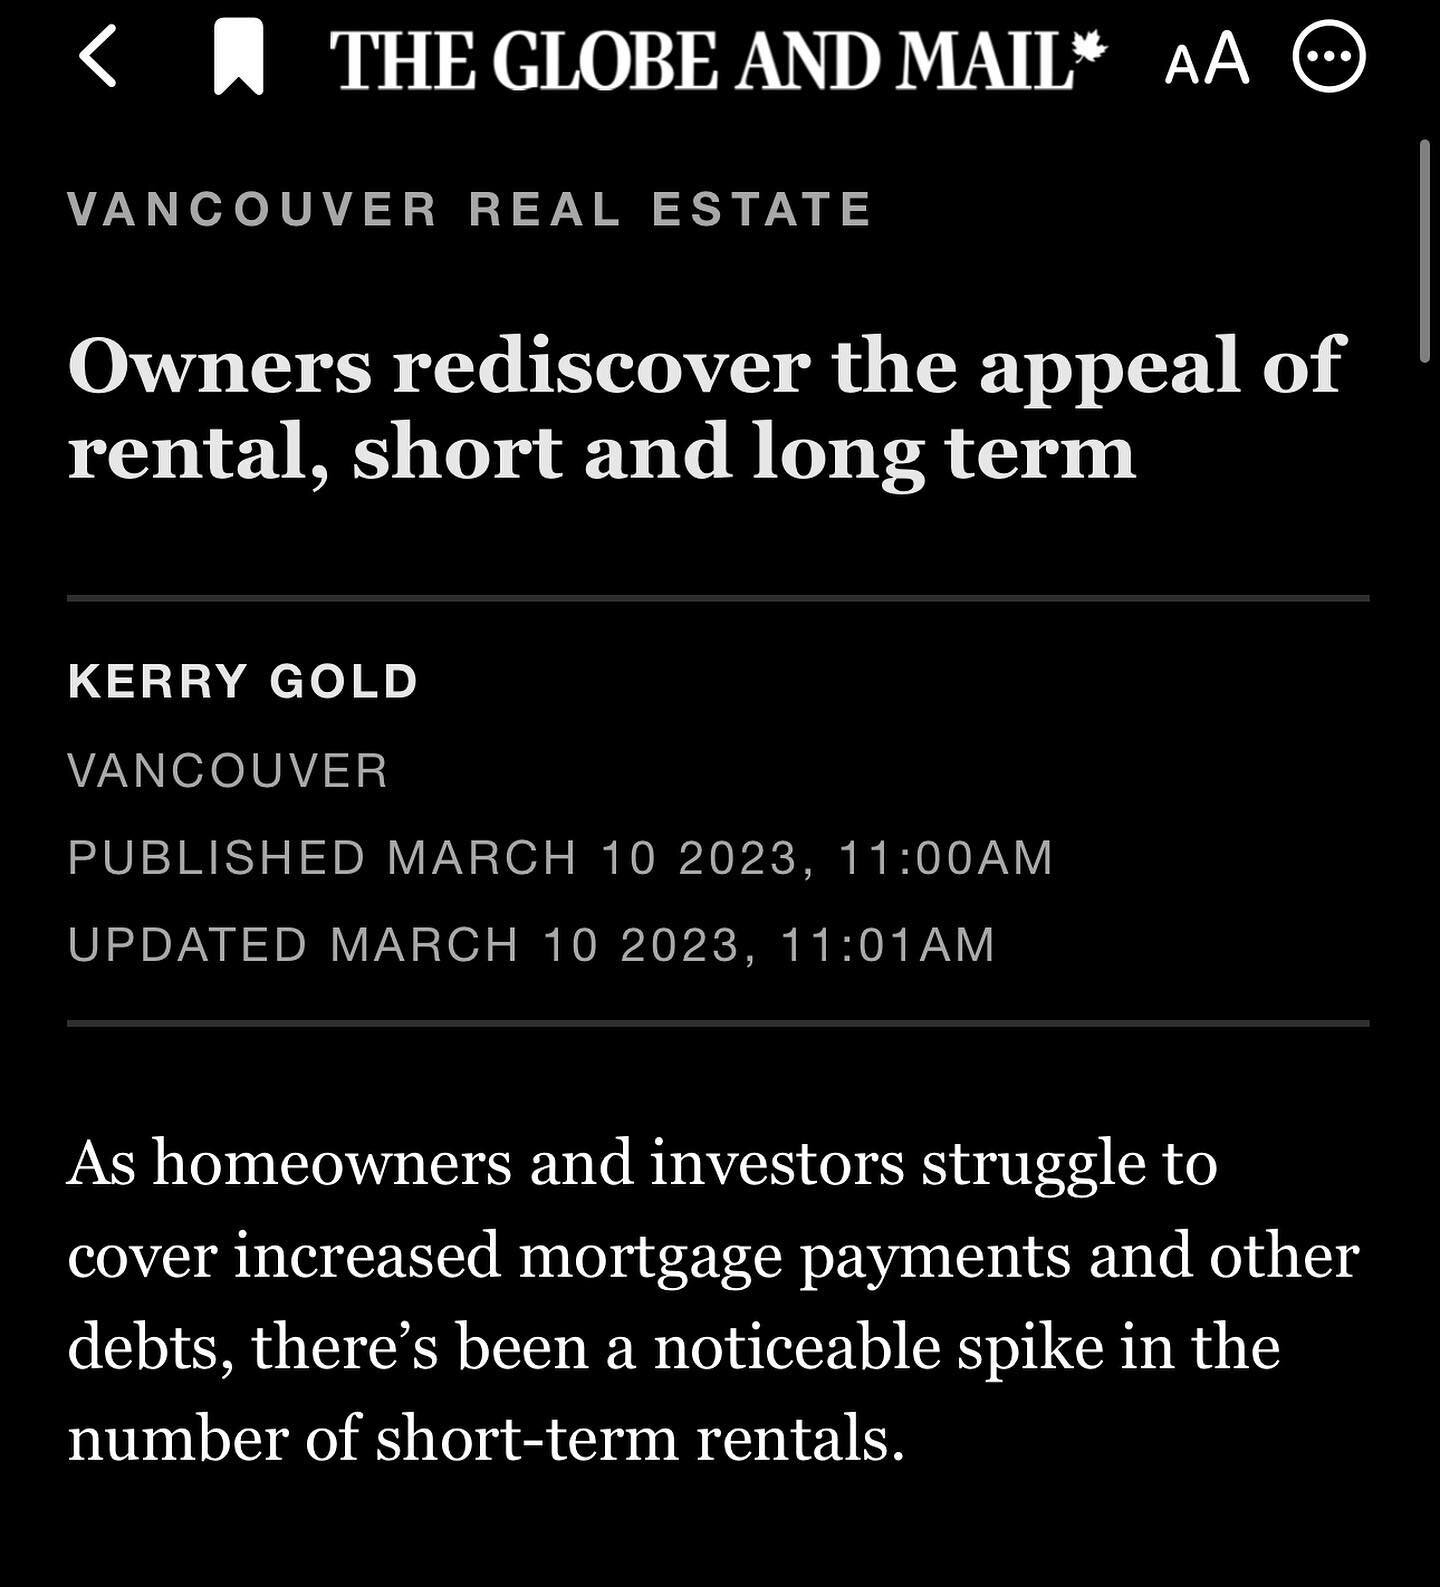 Vacation Rentals are always a hot topic in RE investing. Here&rsquo;s a few snippets from my interview with the Globe and Mail.  #kelownarealestate #vancouverrealestatenews #shorttermrentalinvesting